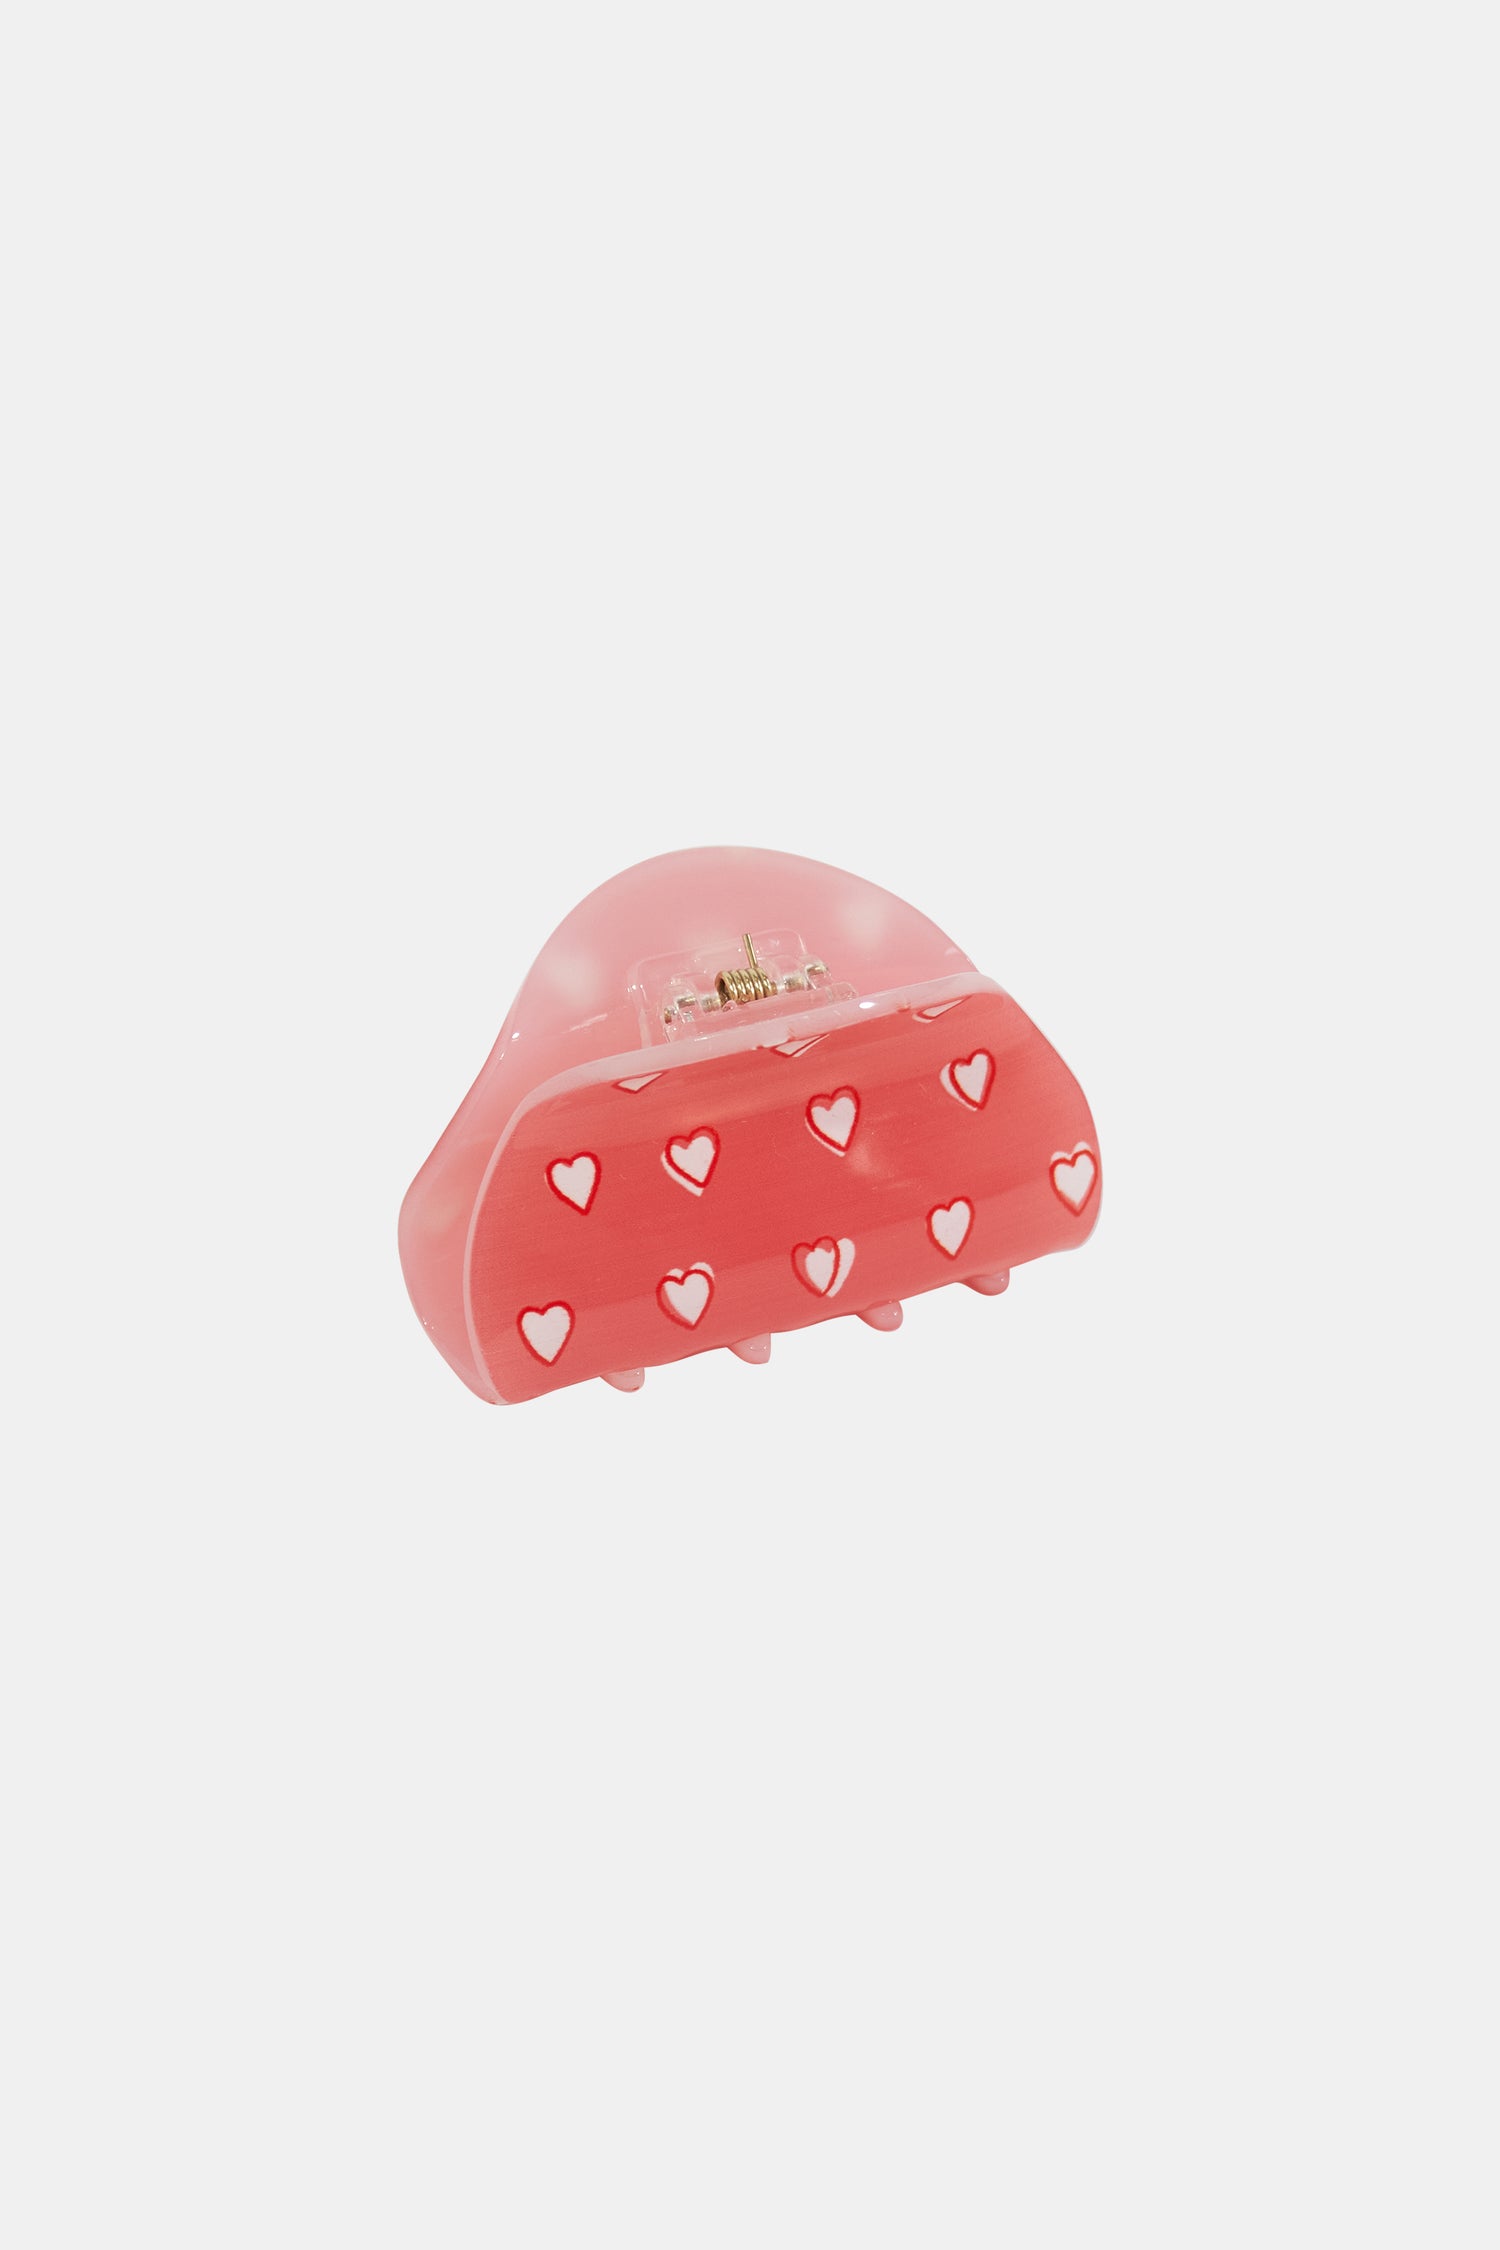 Roller Rabbit Pink Hearts Rounded Claw Clip